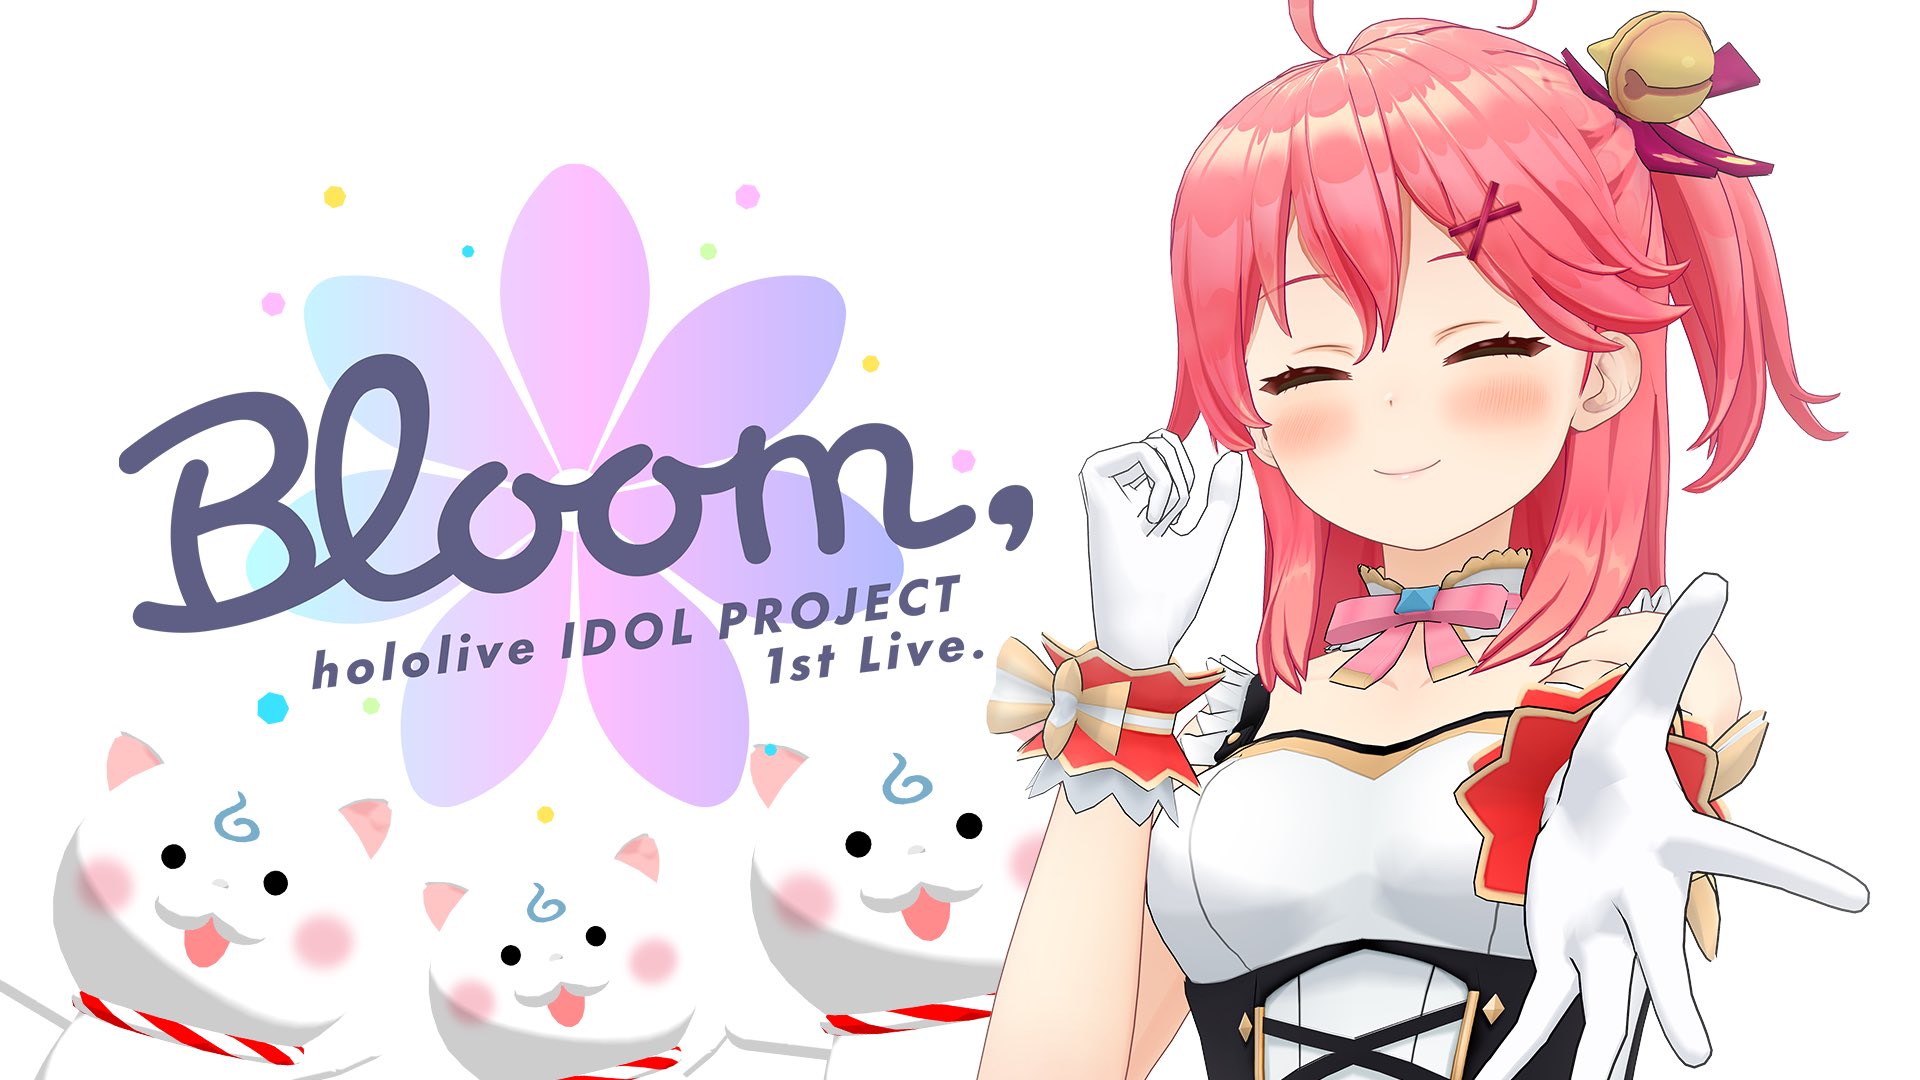 hololive IDOL PROJECT 1st Live. 『Bloom,』出演